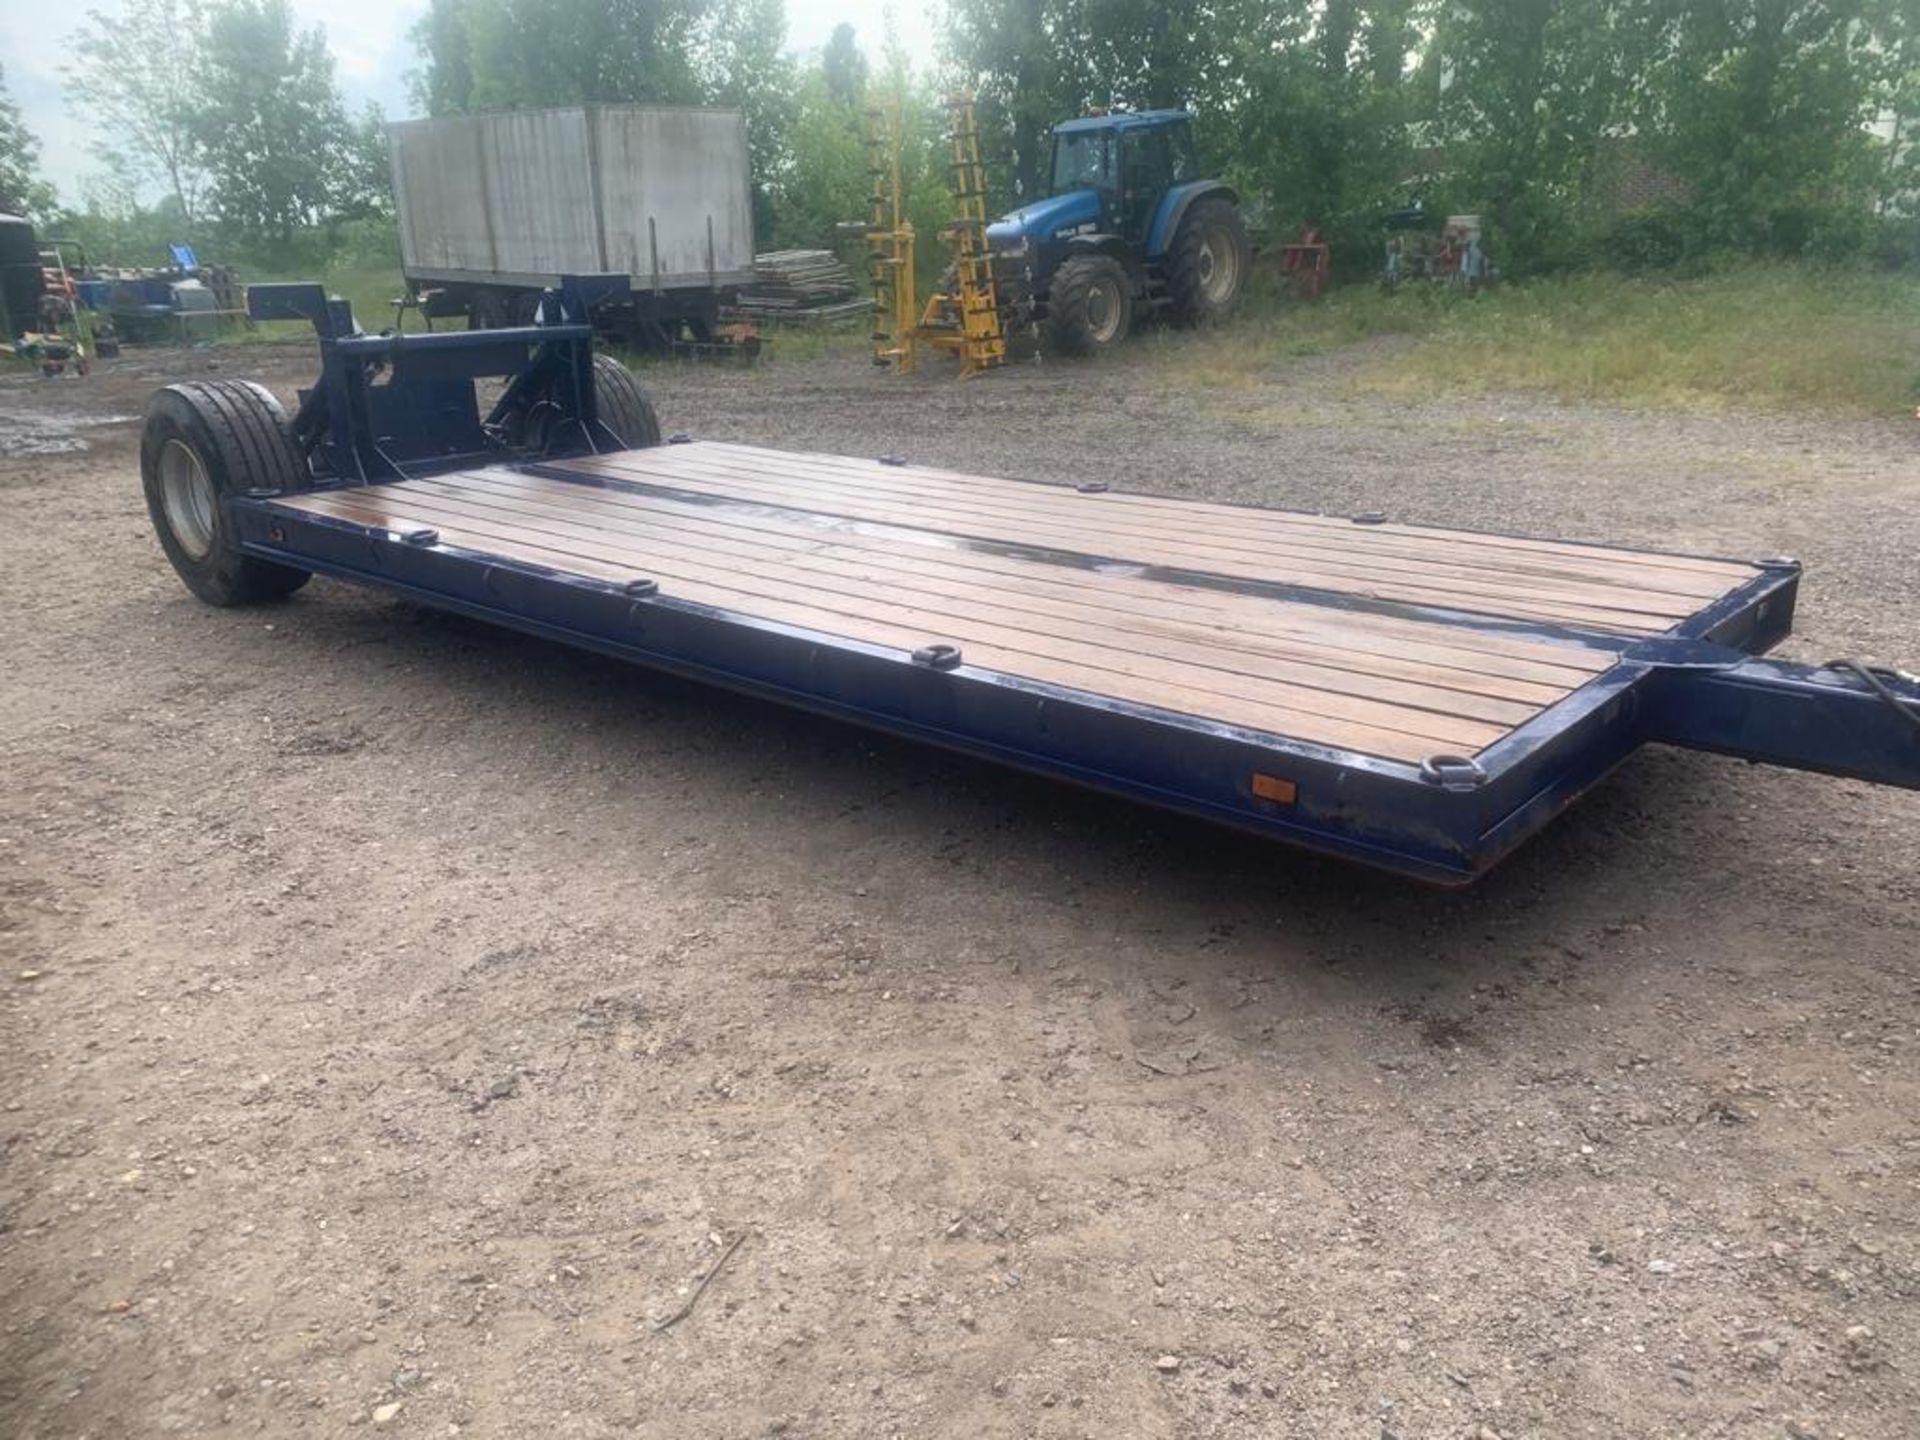 8t drop deck low loader with lights, hydraulic brakes and storage box 5.25m x 2.40m